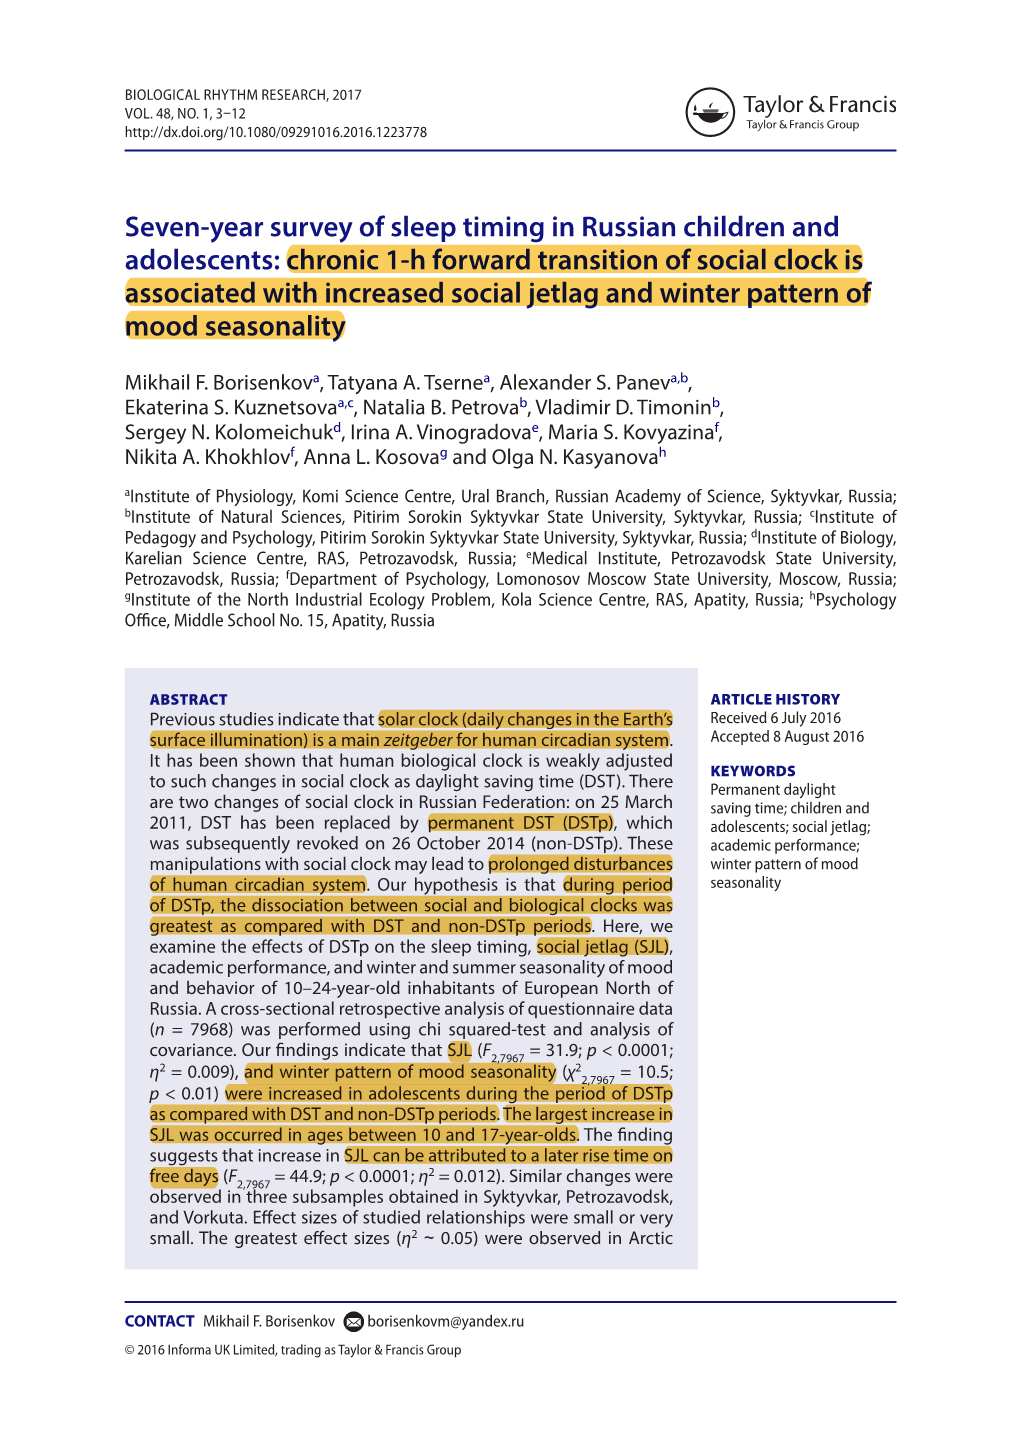 Seven-Year Survey of Sleep Timing in Russian Children and Adolescents: Chronic 1-H Forward Transition of Social Clock Is Associa